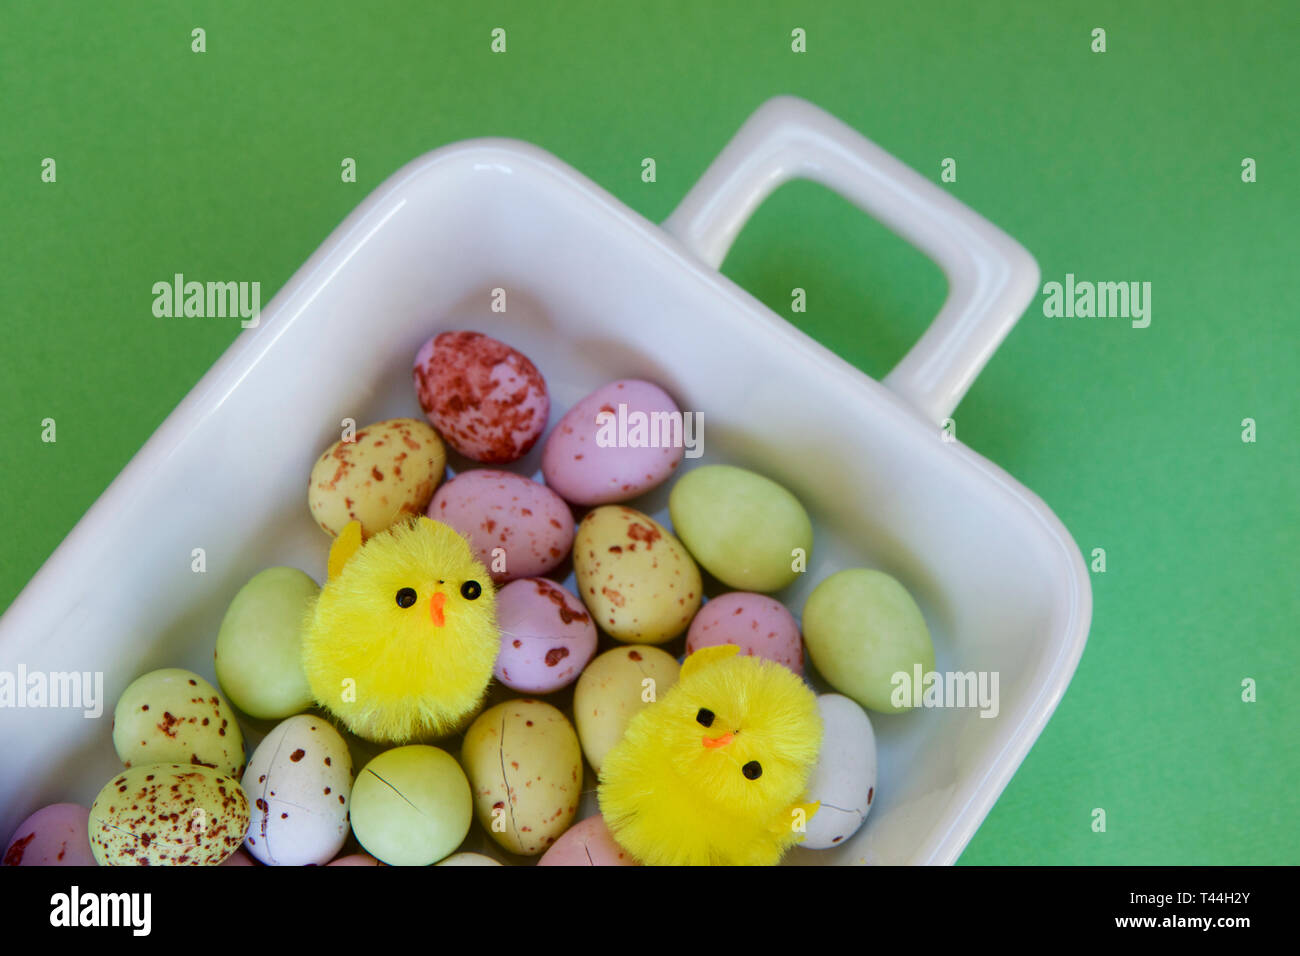 Speckled Easter eggs and two chicks on a white plate with a green background. Stock Photo